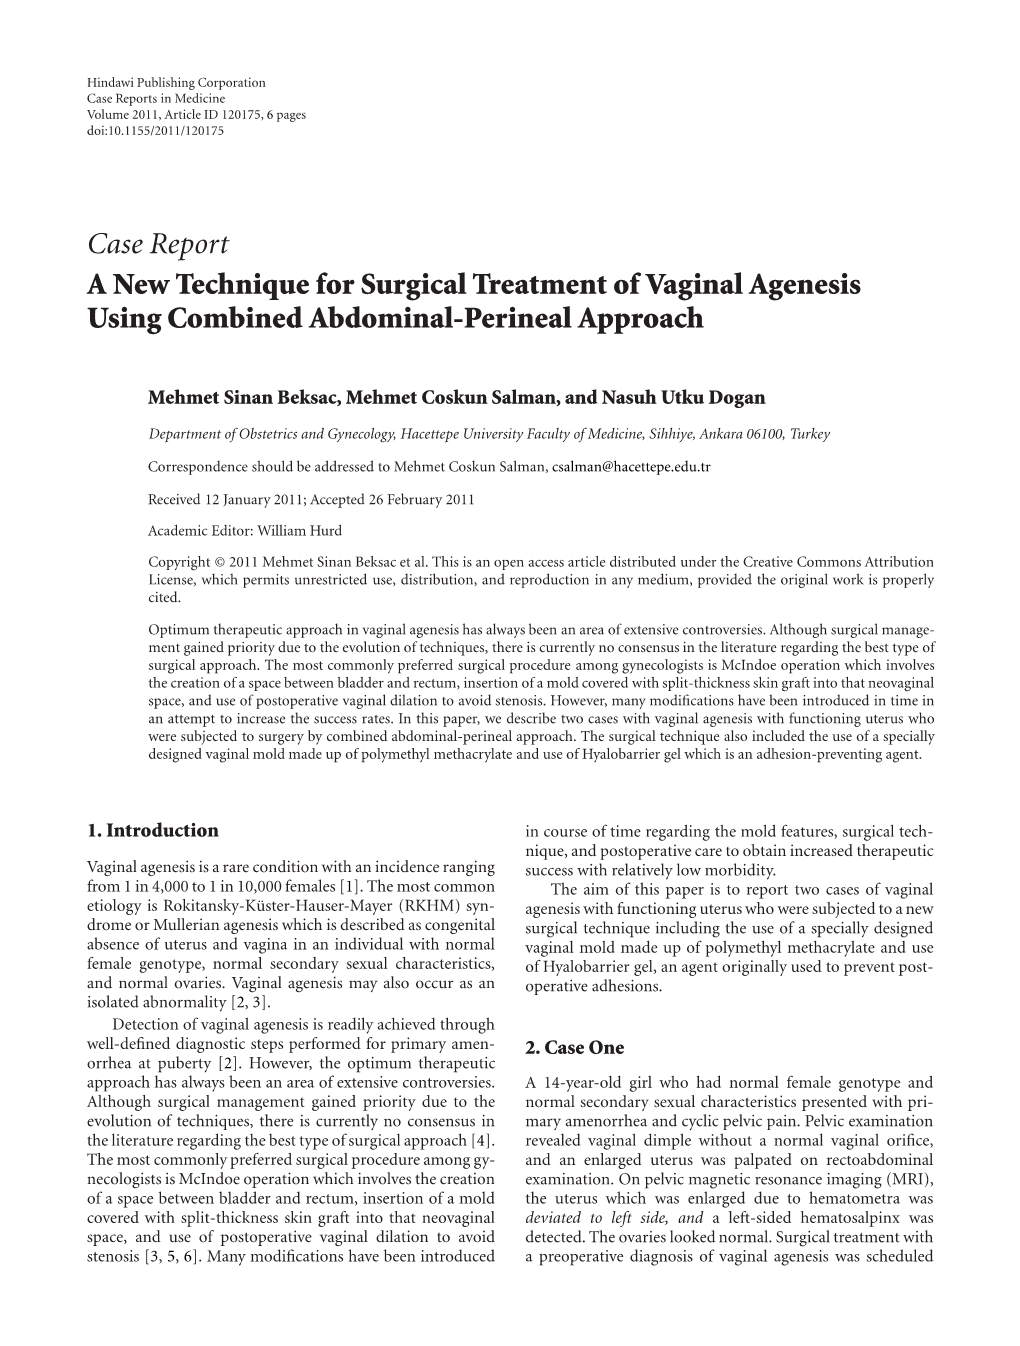 Case Report a New Technique for Surgical Treatment of Vaginal Agenesis Using Combined Abdominal-Perineal Approach